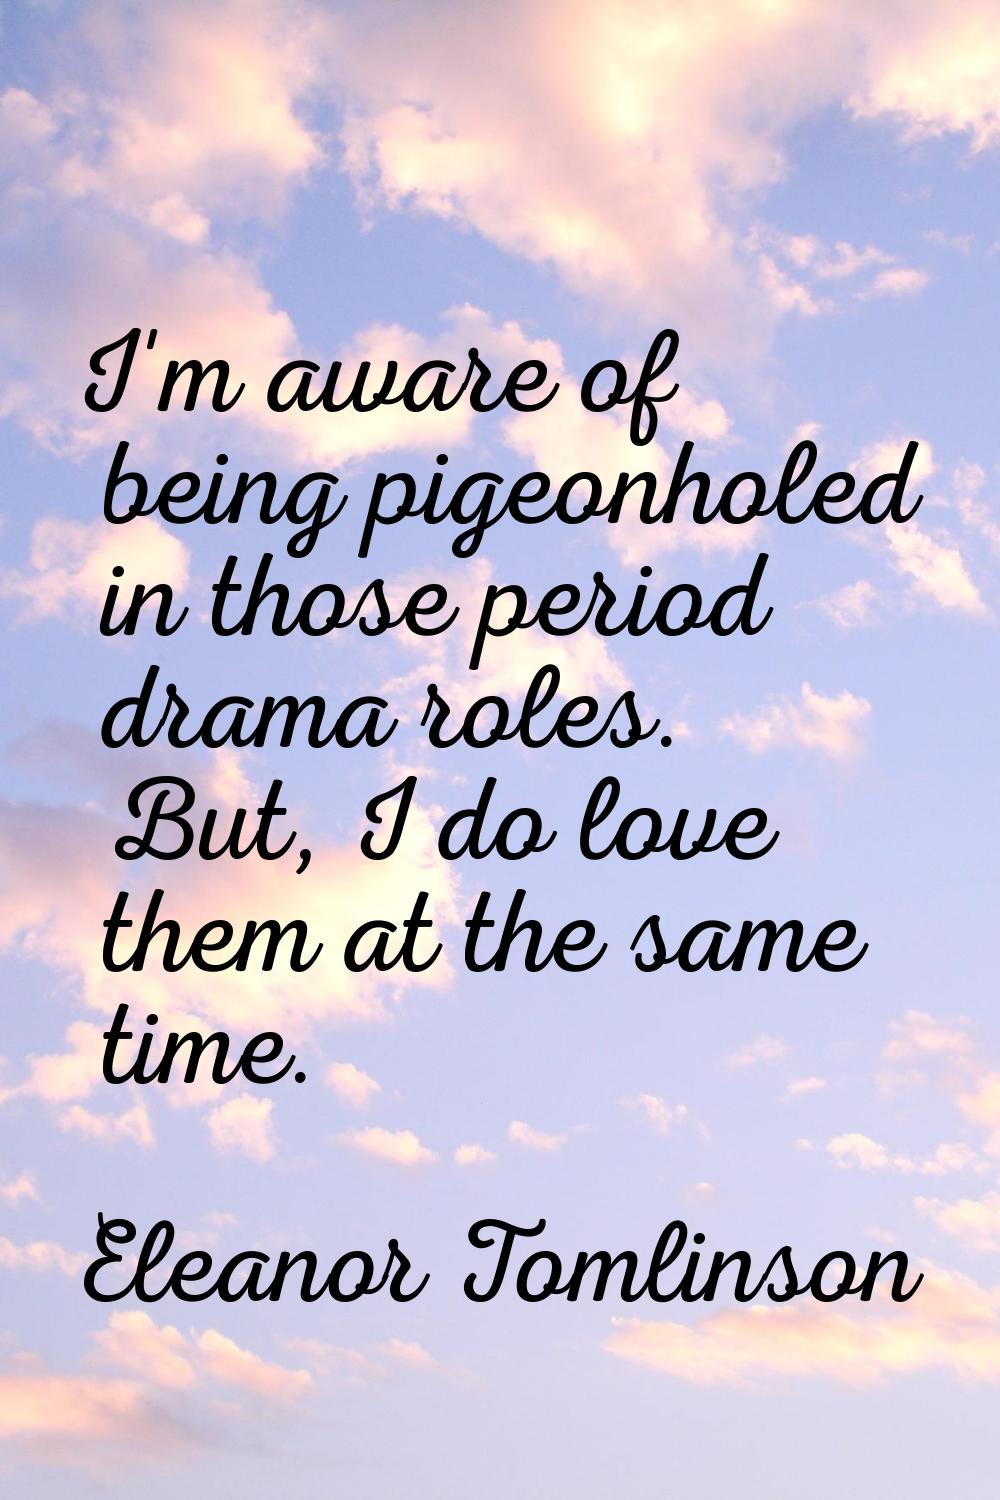 I'm aware of being pigeonholed in those period drama roles. But, I do love them at the same time.